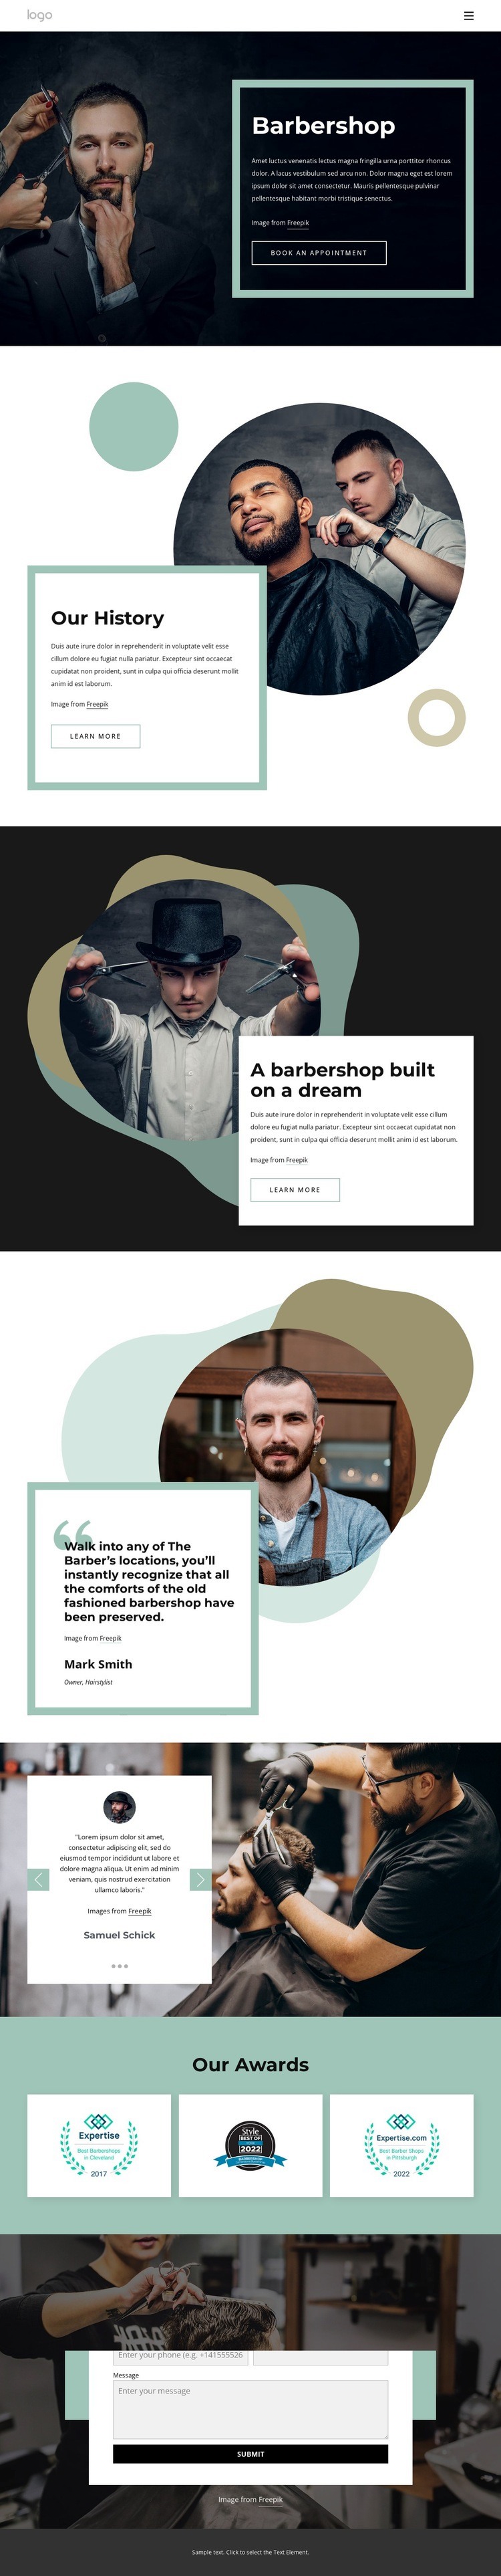 Barber shop through the ages Homepage Design